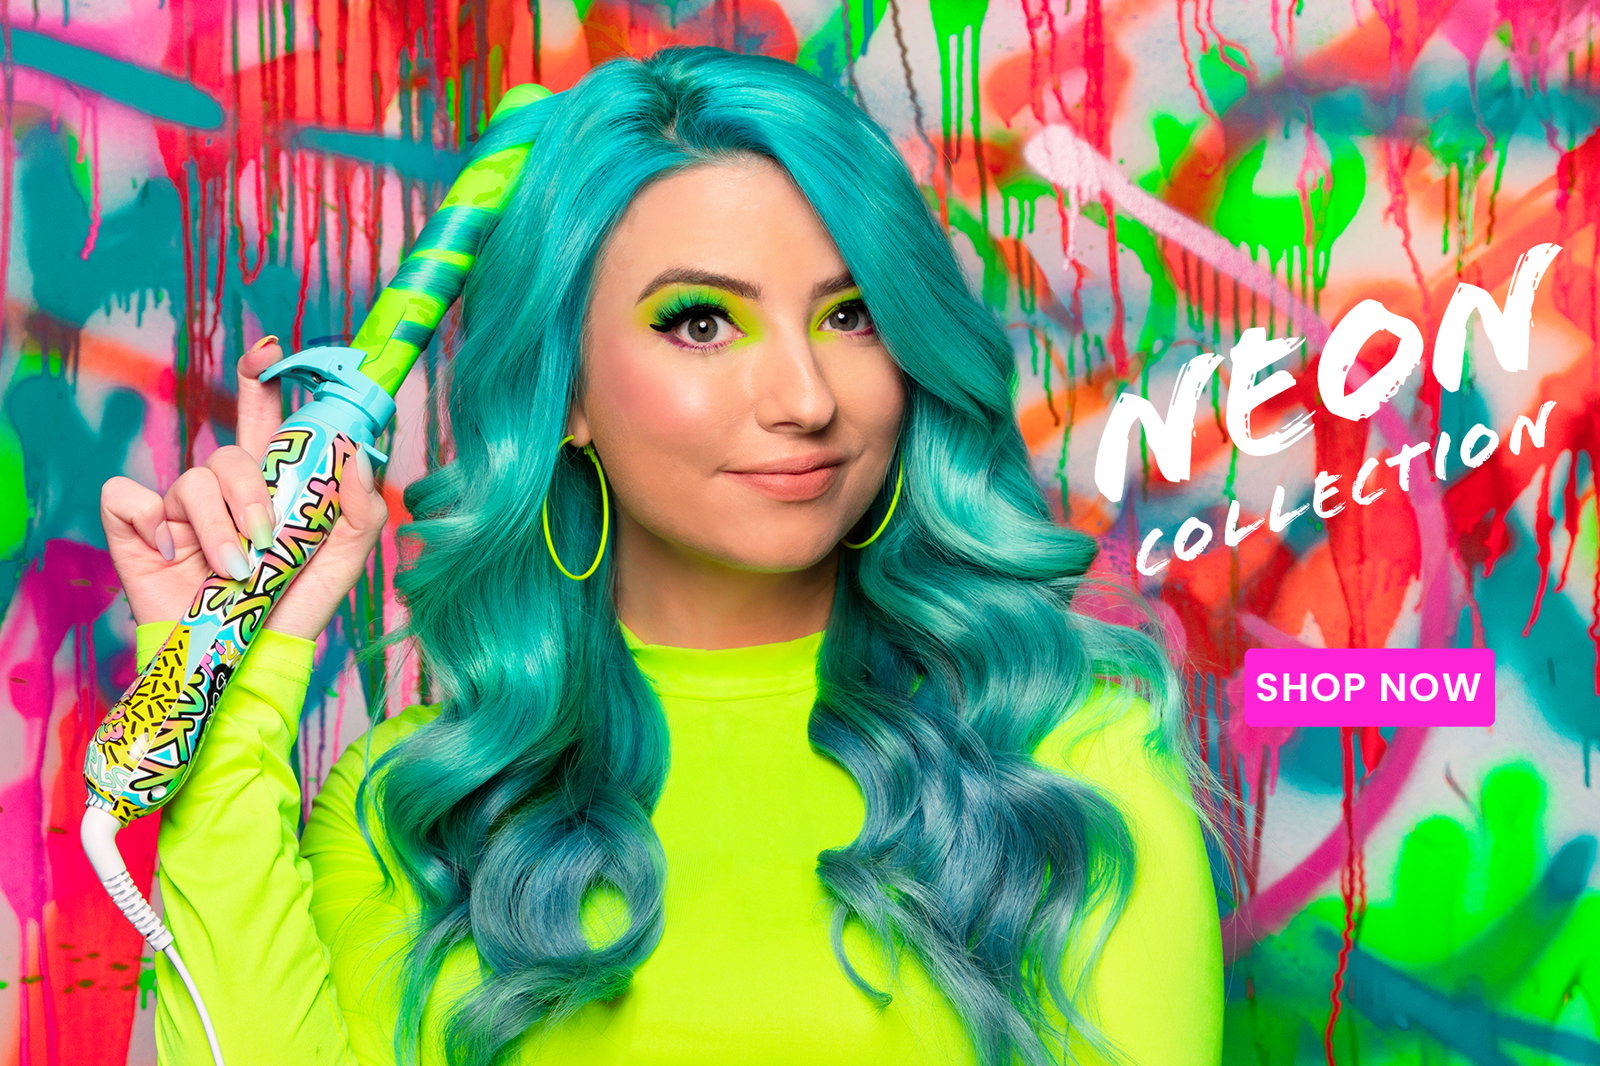 Beachwaver OMG! We just dropped an EPIC new Neon Collection! Milled